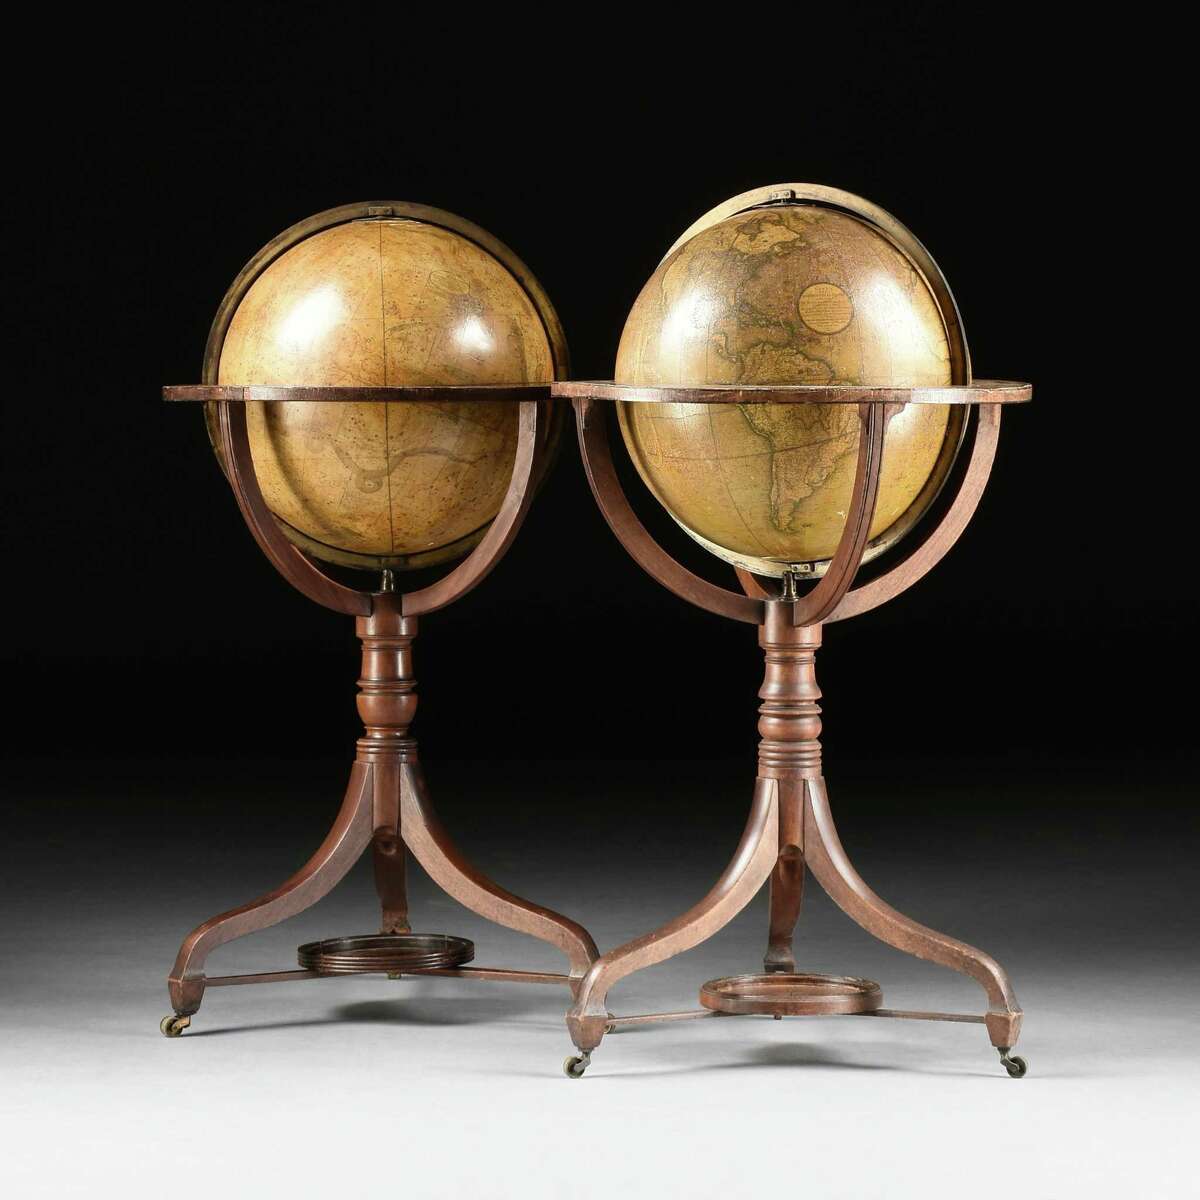 This rare, matched pair of Regency Cary’s New Terrestrial and Celestial, 18-inch globes on stands, made by John and William Cary, Strand, London, 1816, will be part of virtual auction Oct. 1, 2022, by Simpson Galleries. The auction includes several items from the estate of Jesse H. Jones and his wife Mary Gibbs Jones; the items had been given to Houston Endowment, a nonprofit founded by the Joneses.